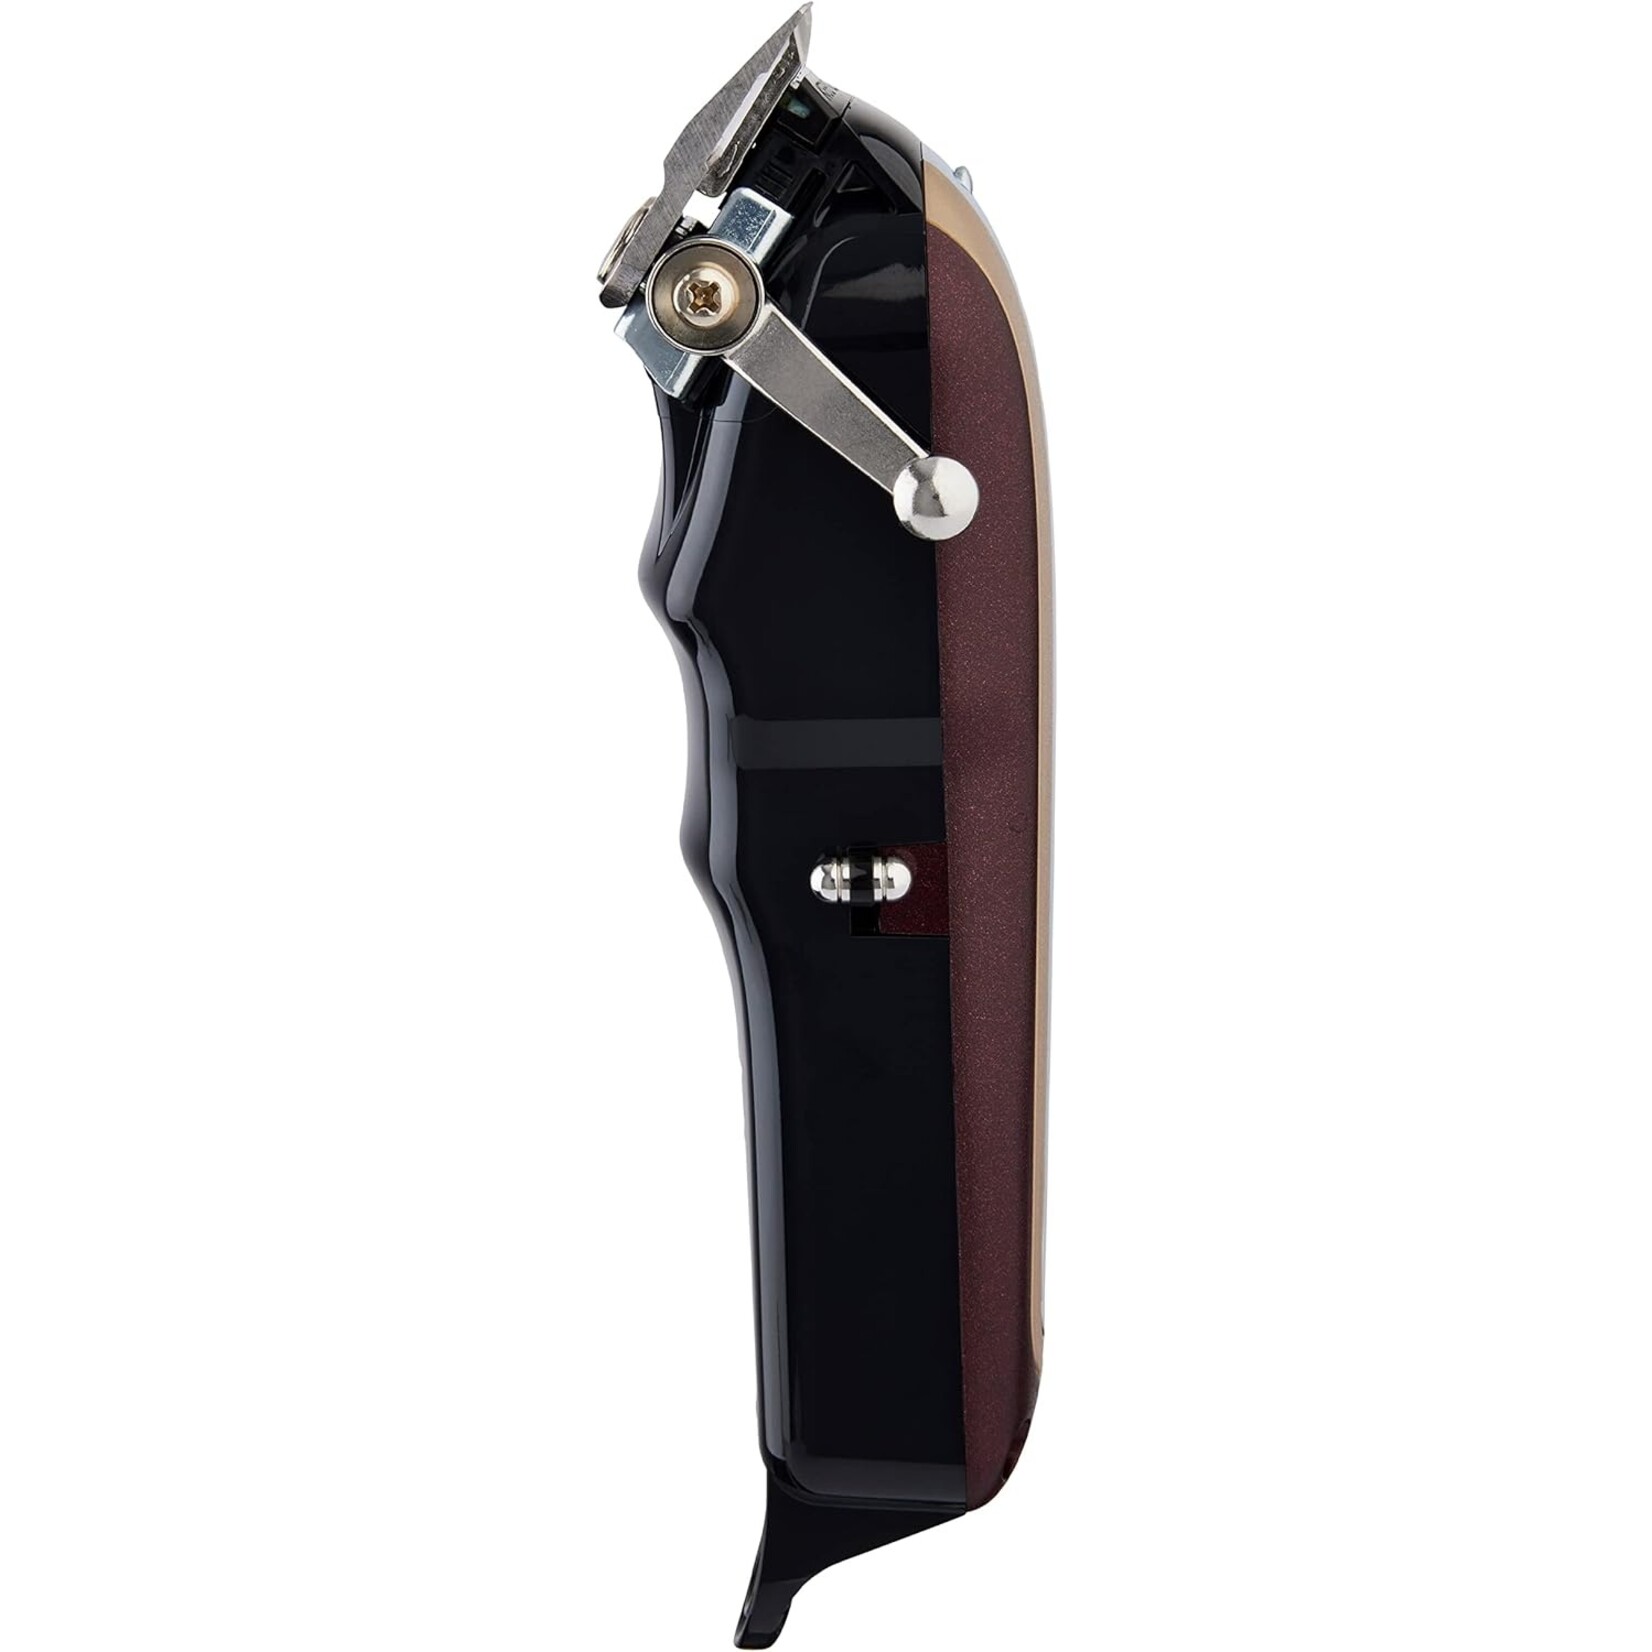 Wahl Pro Wahl - Cordless 5 star legend hair clipper